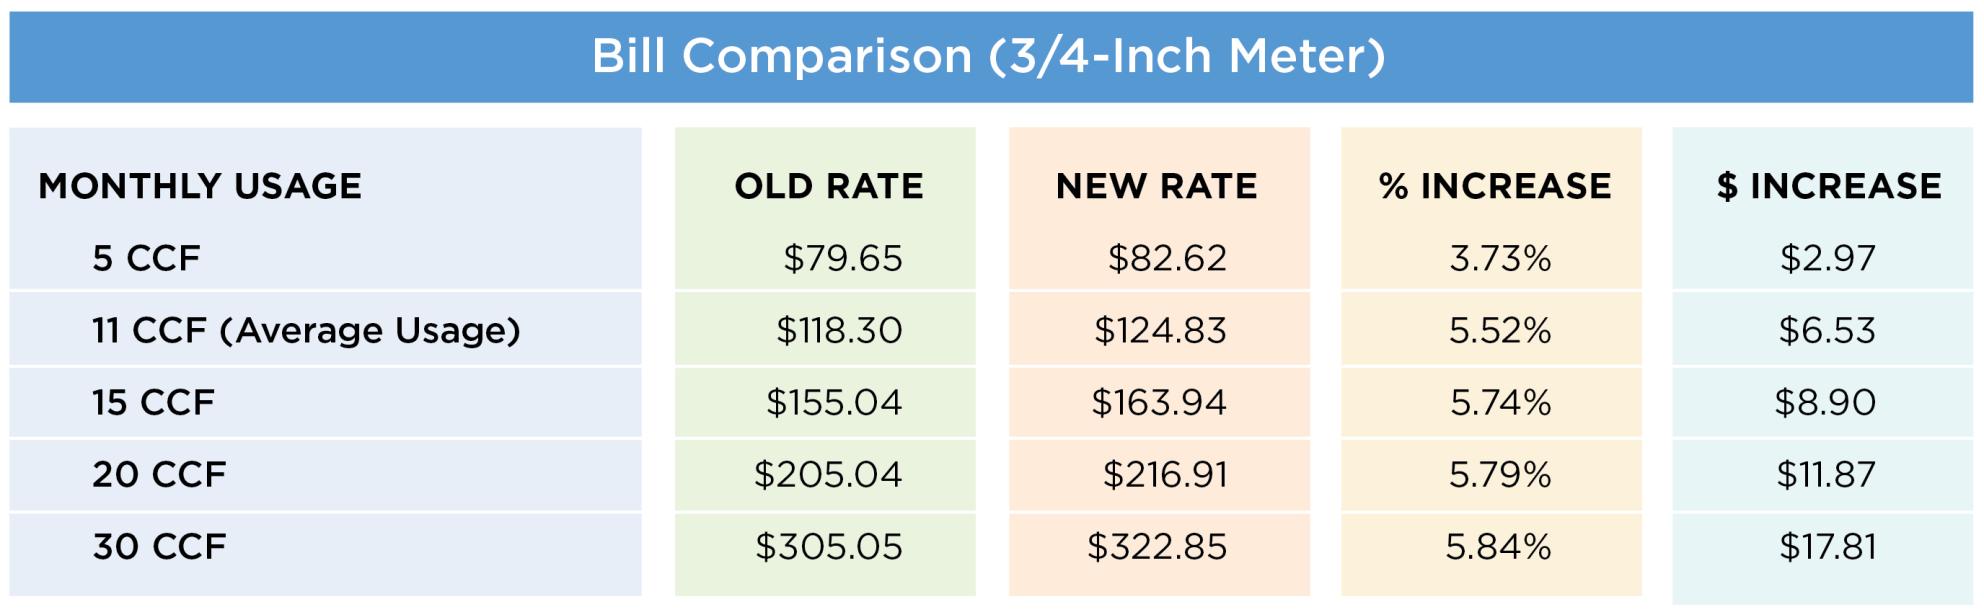 Valley Water Rate Increase Bill Comparison Chart